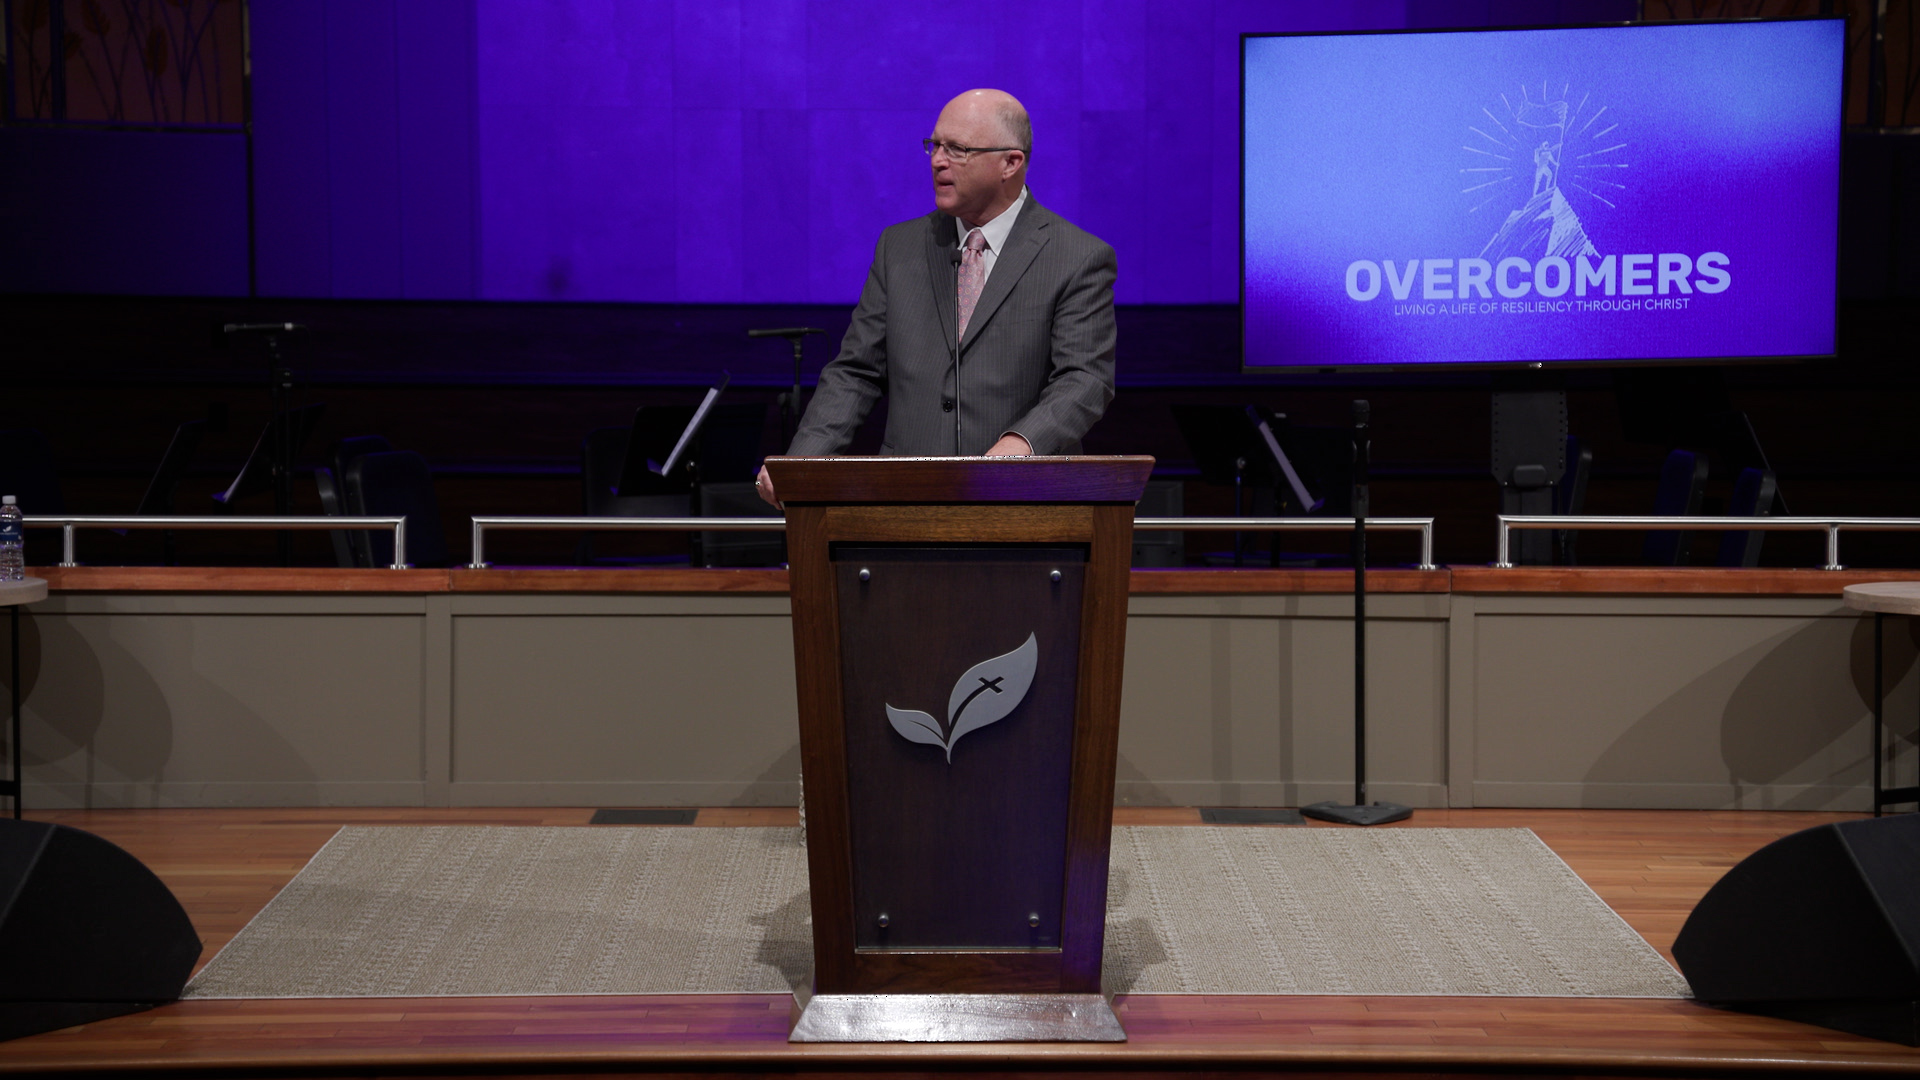 Pastor Paul Chappell: Overcoming Fear